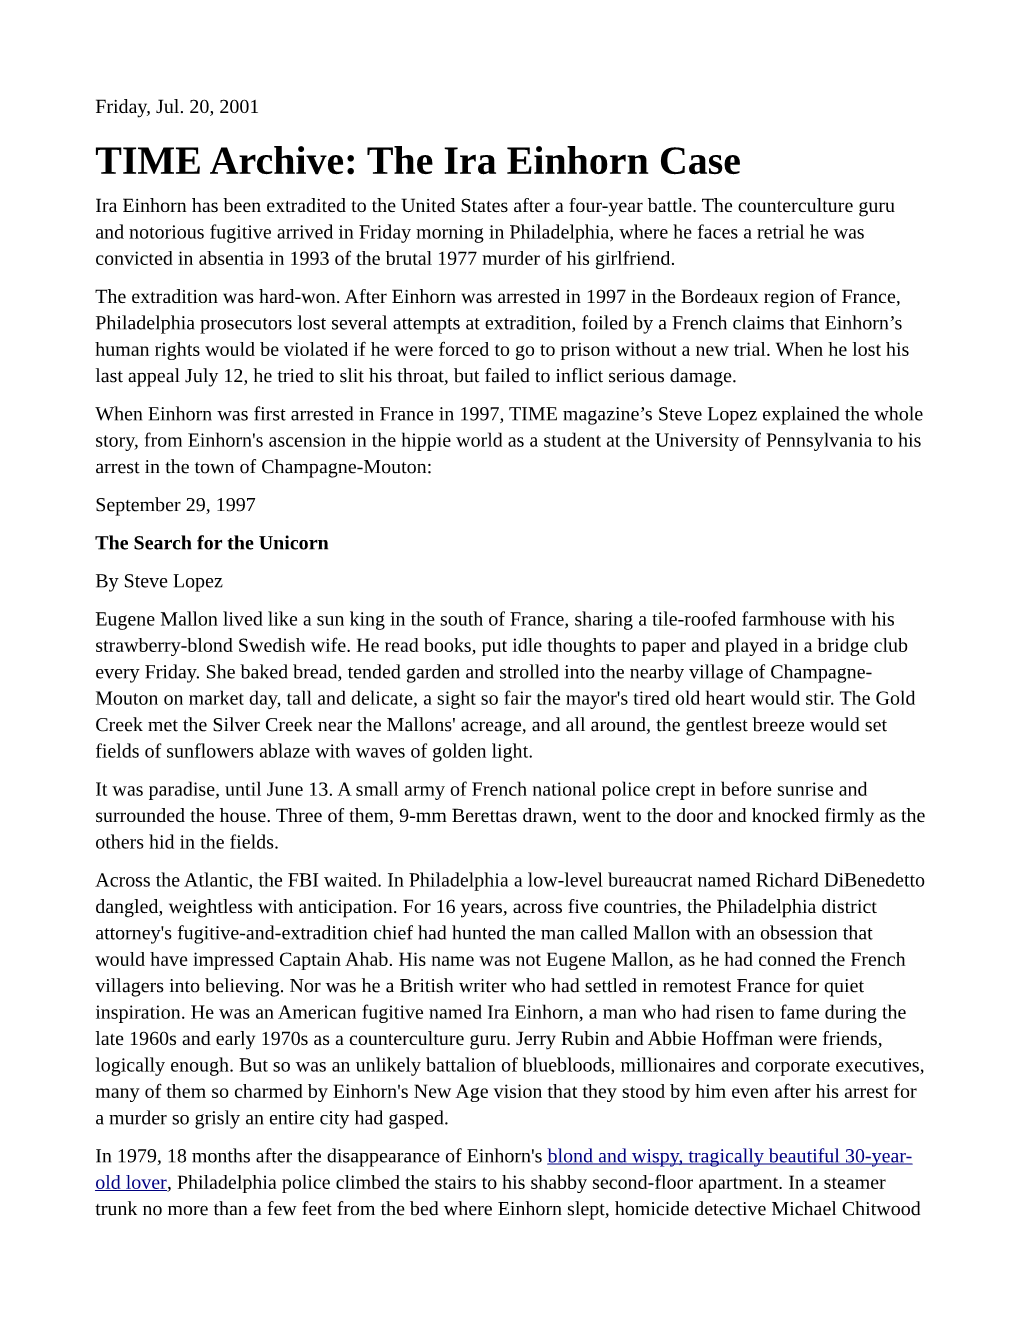 The Ira Einhorn Case Ira Einhorn Has Been Extradited to the United States After a Four-Year Battle